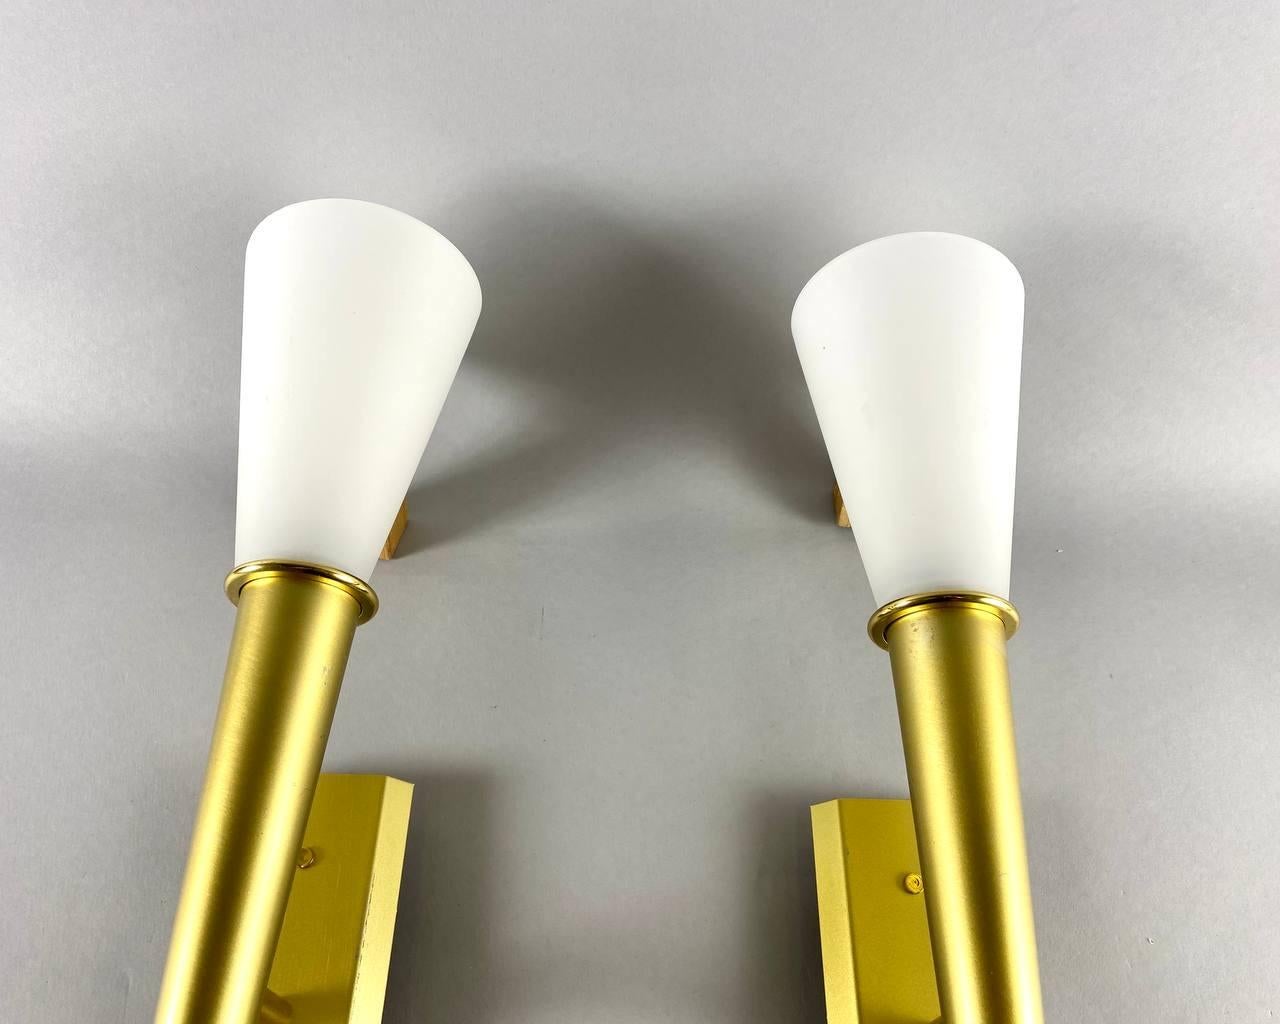 Elegant white glass pair of wall lights in conical shape with gold brushed metallic frame by WOFI Leuchten, Germany.

A simple and elegant design. White glass and gold brushed metal come together to create this wonderful piece of lighting that